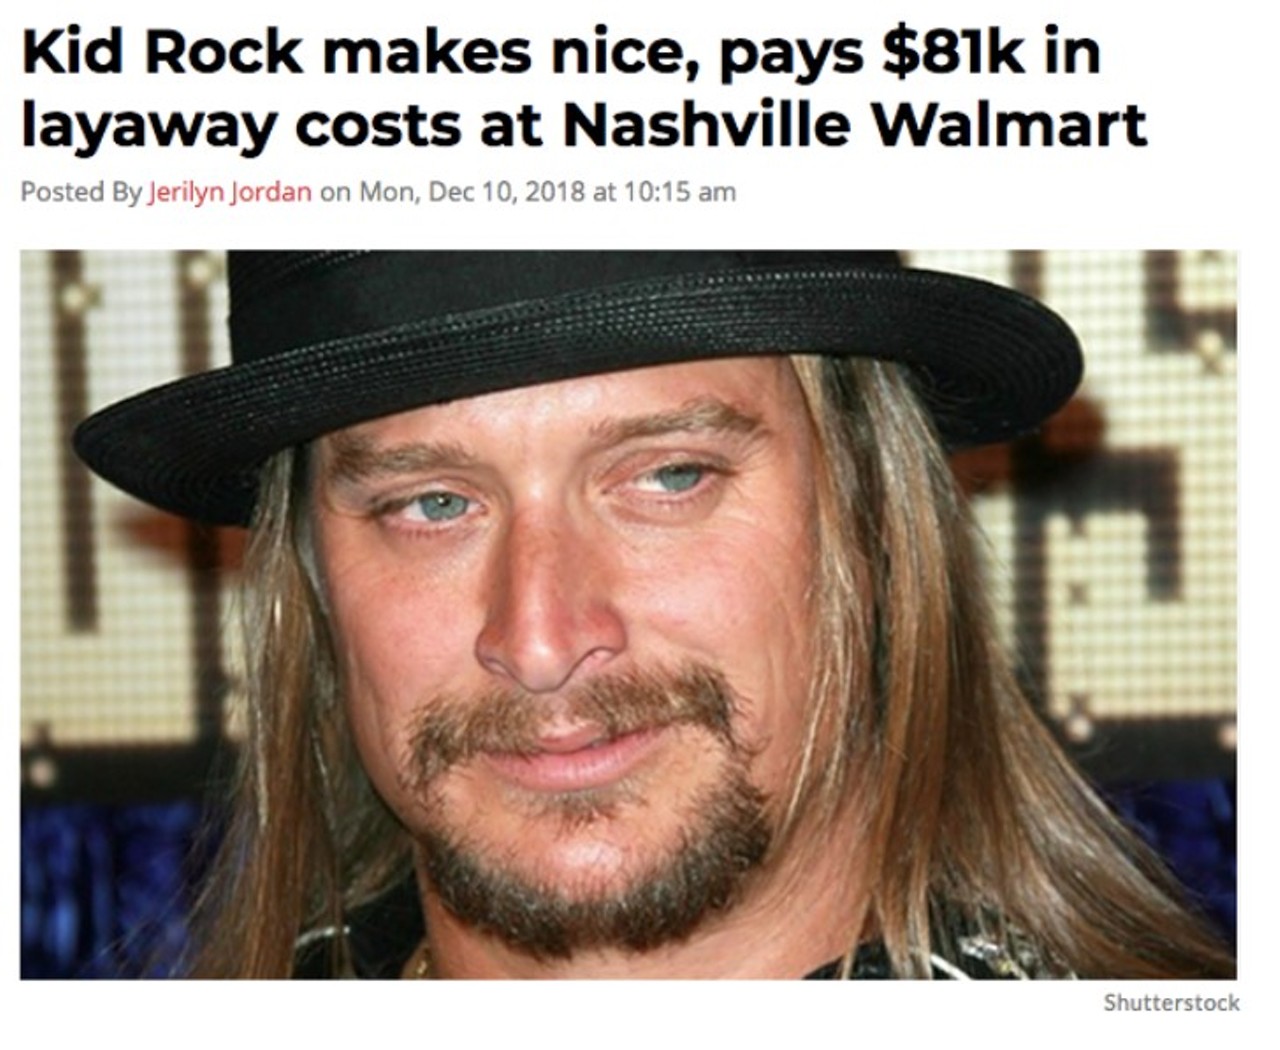 "Kid rock looks like he was left out of the duck tales."
-Robert Kensicki
You can read the full story here.